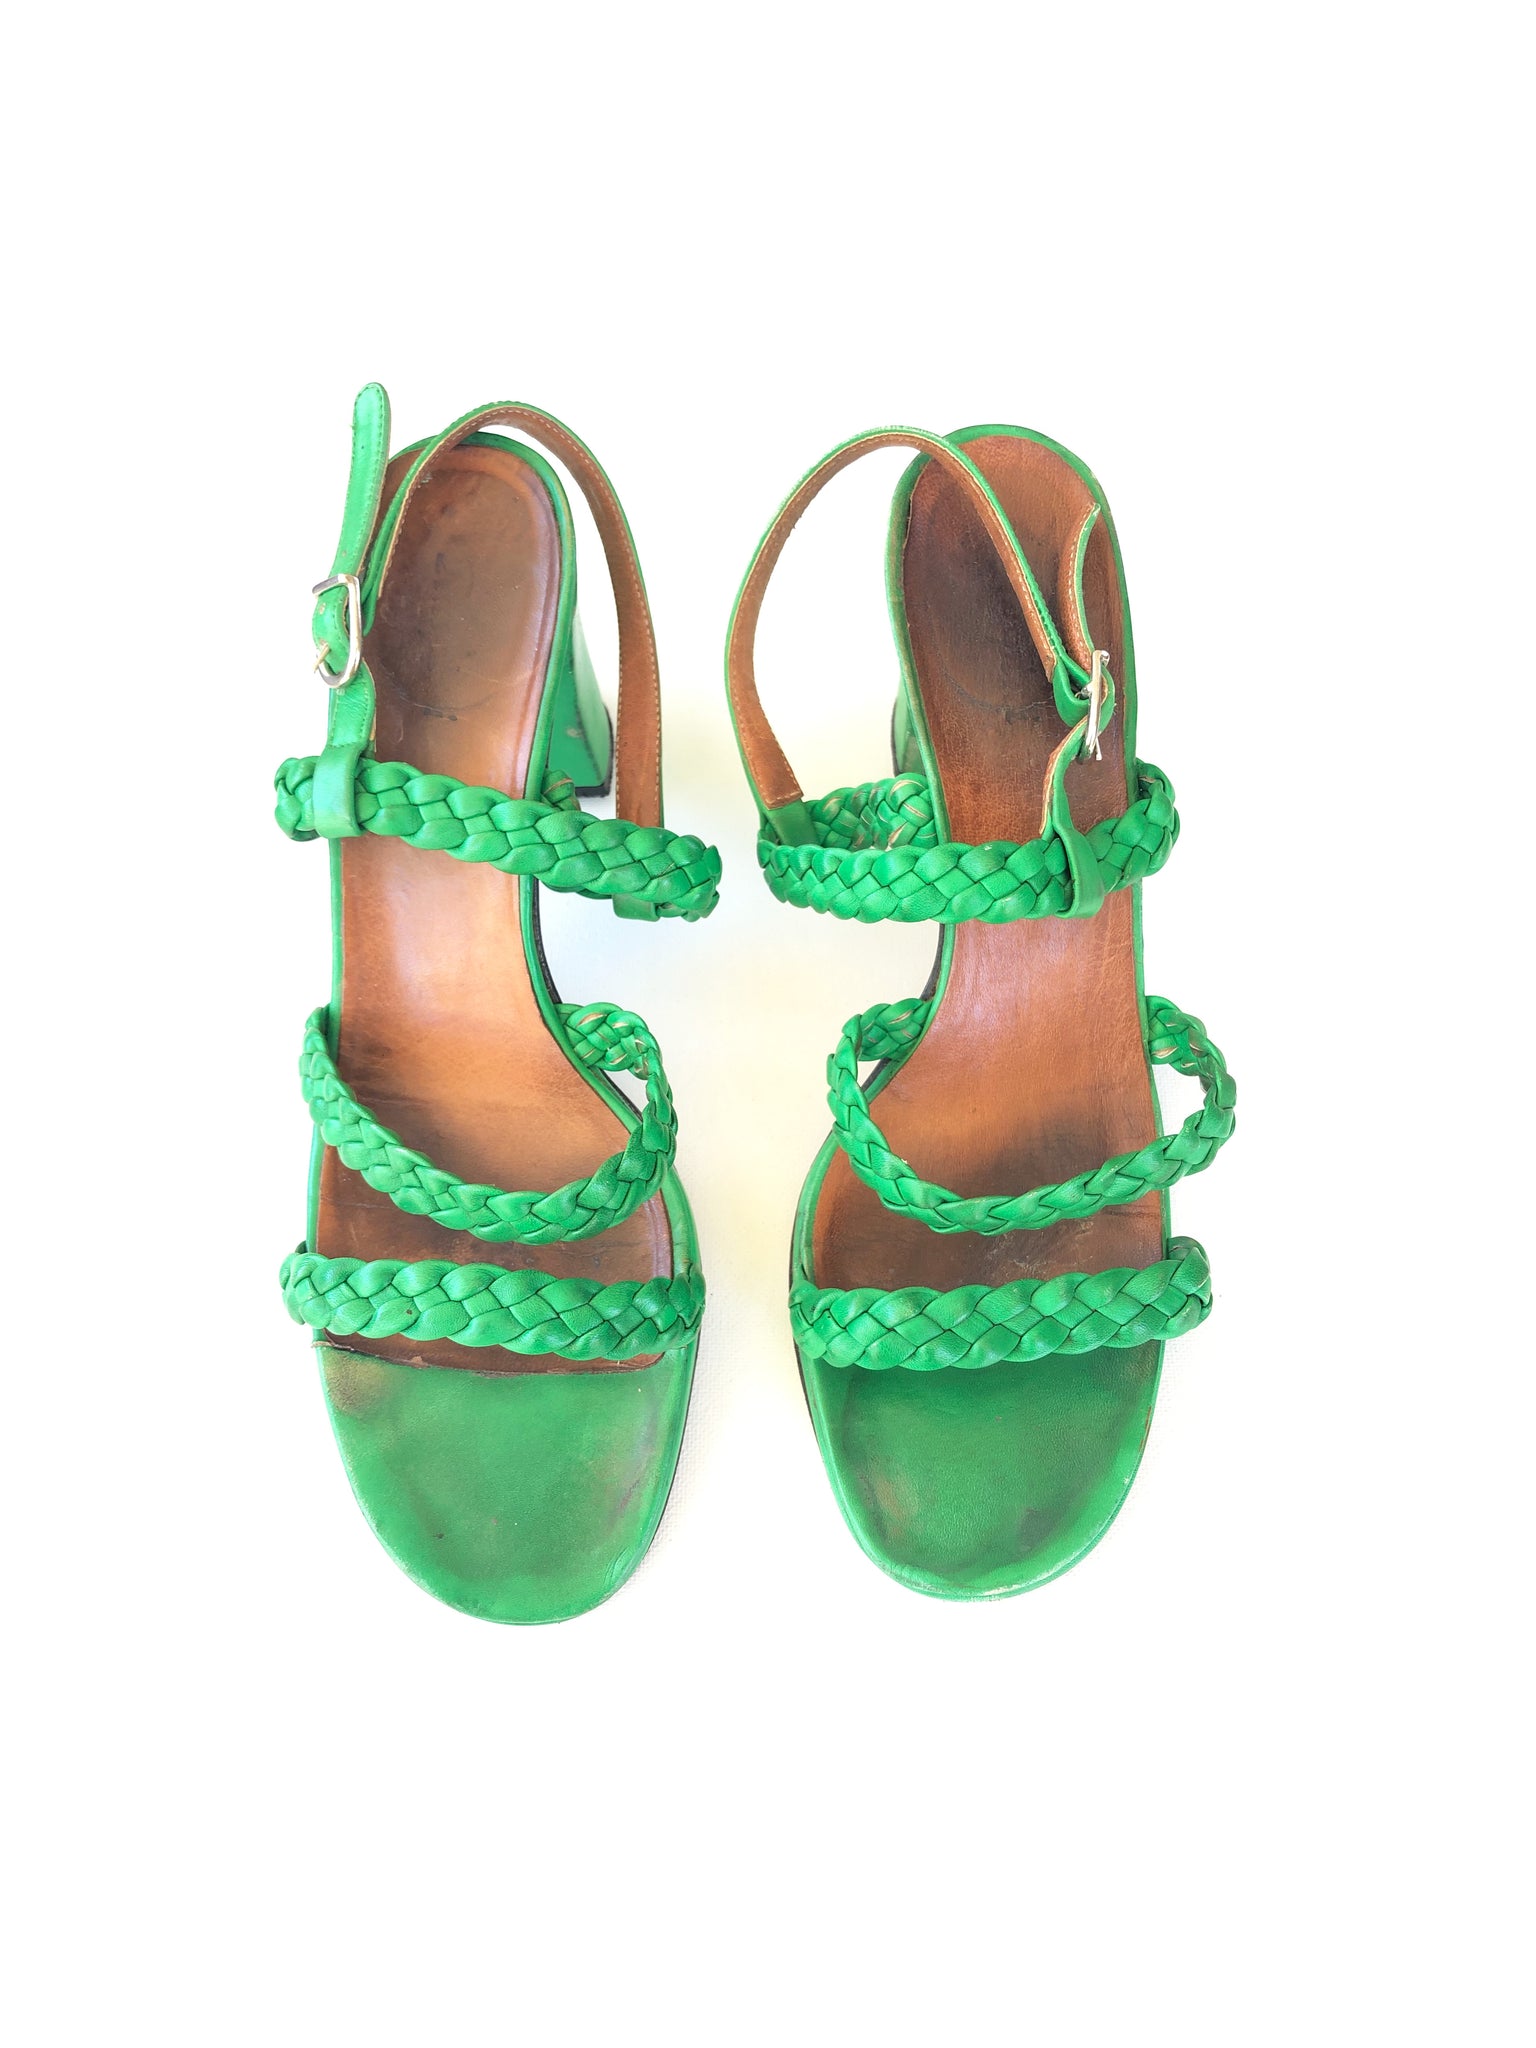 VINTAGE: Woven Leather Sandals - Green